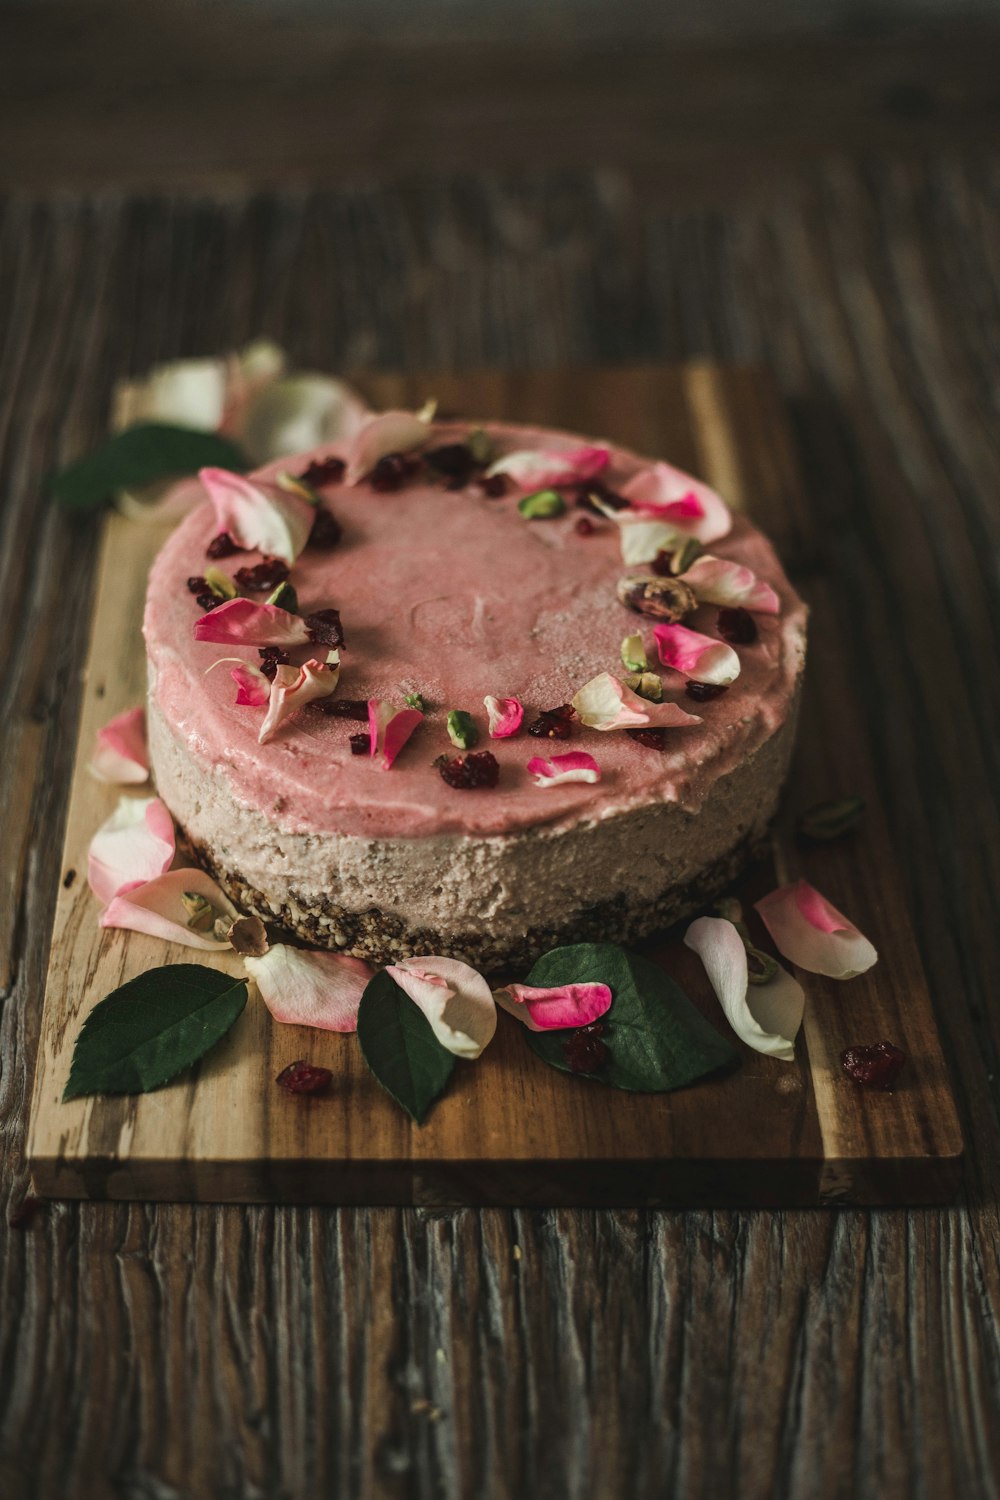 a cake with pink frosting and flowers on a wooden board